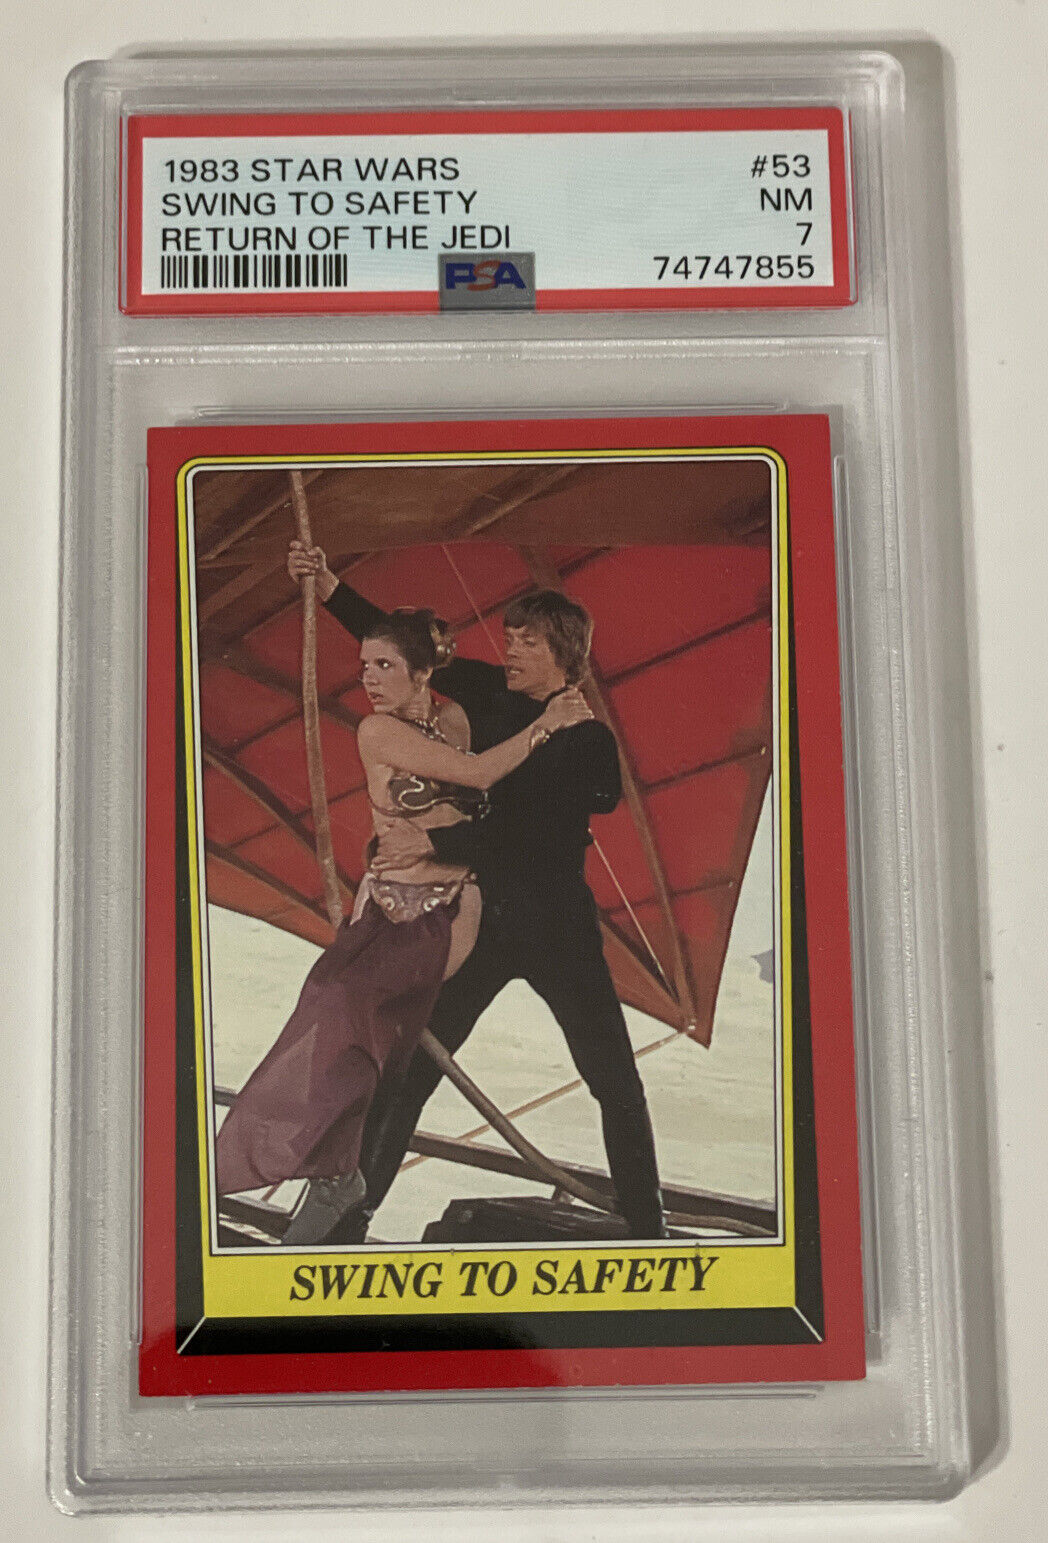 1983 Star Wars Return of the Jedi #53 Swing to Safety PSA 7 NM Luke and Leia